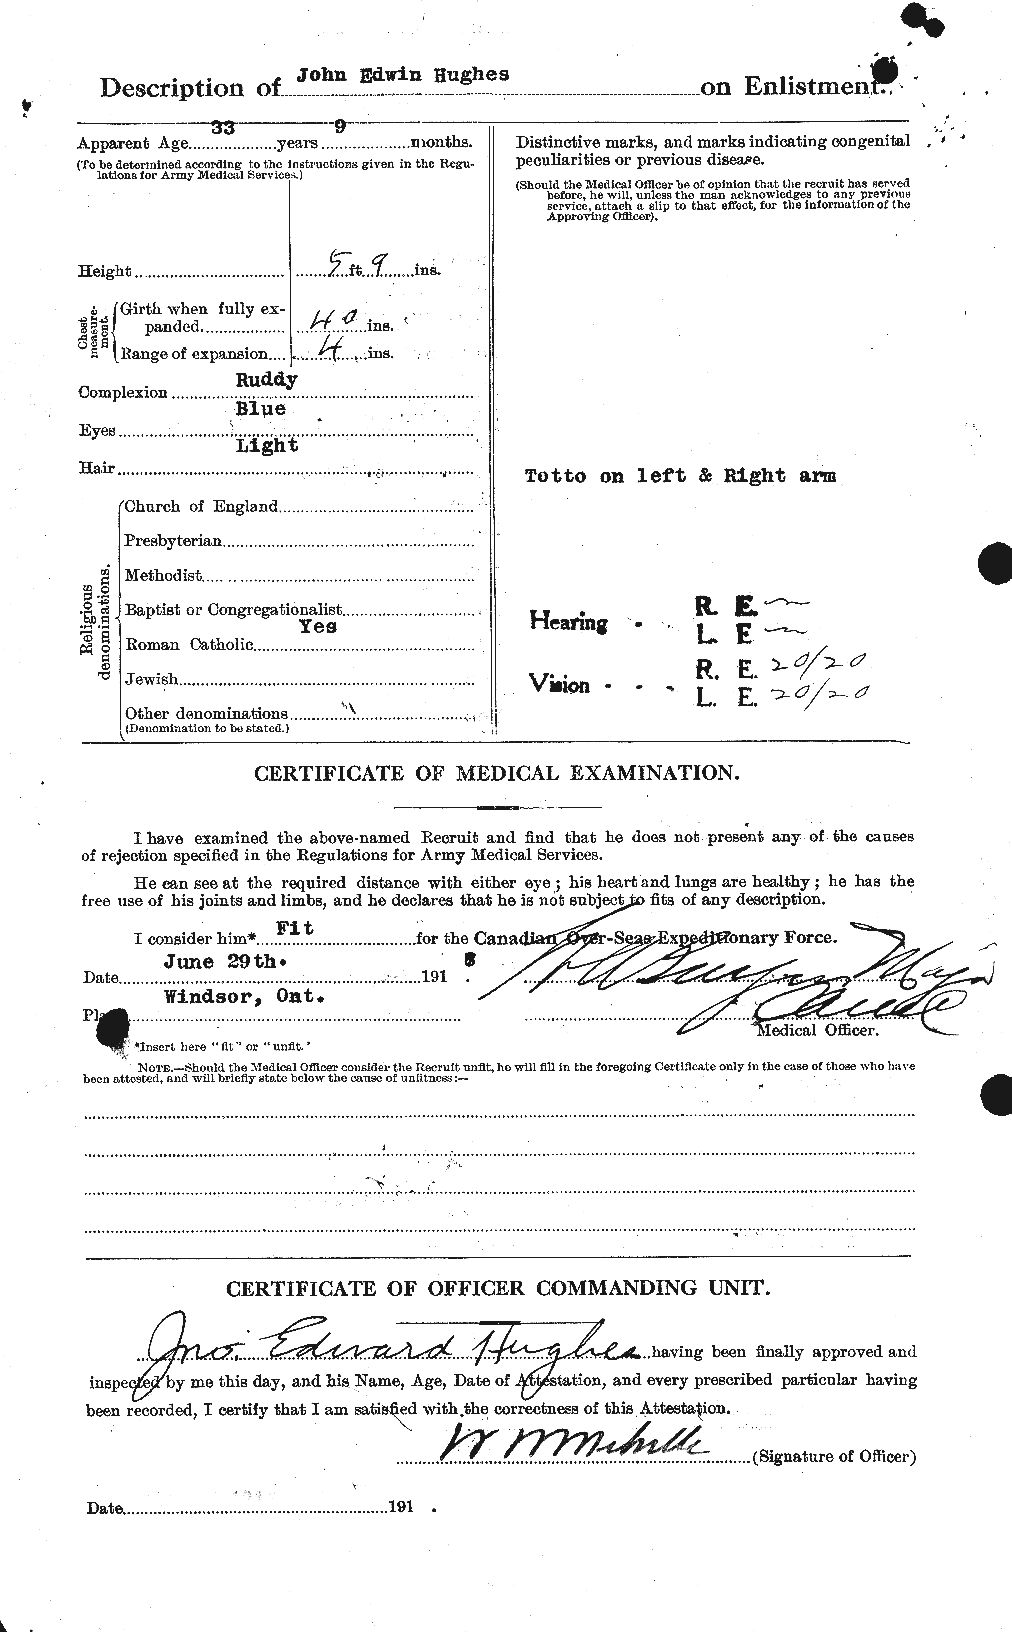 Personnel Records of the First World War - CEF 404013b